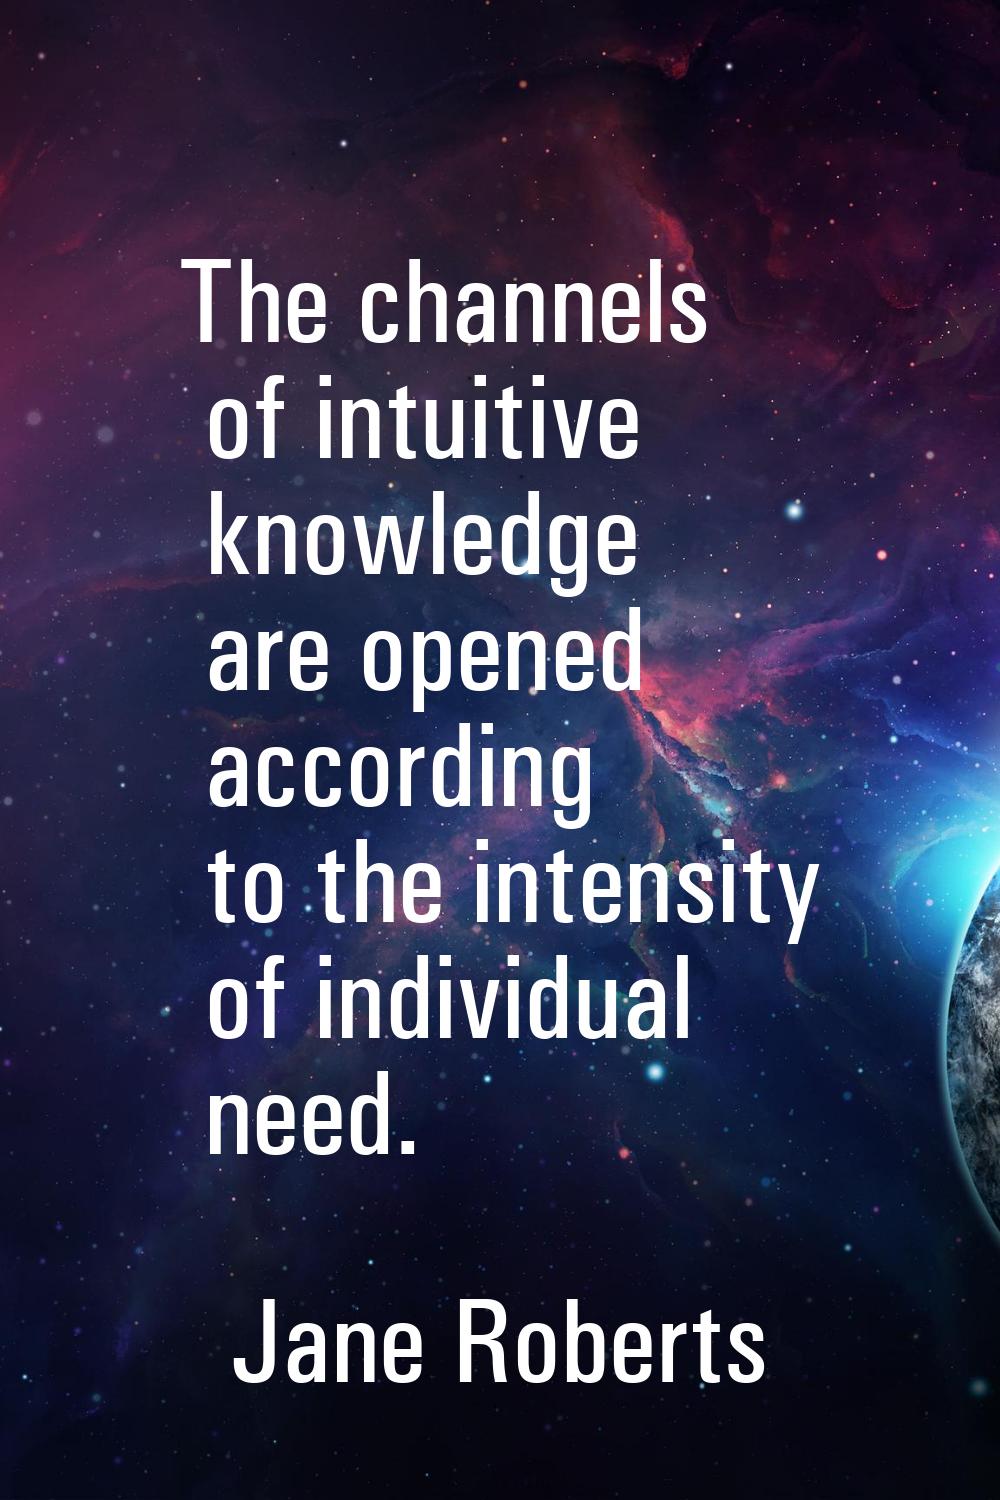 The channels of intuitive knowledge are opened according to the intensity of individual need.